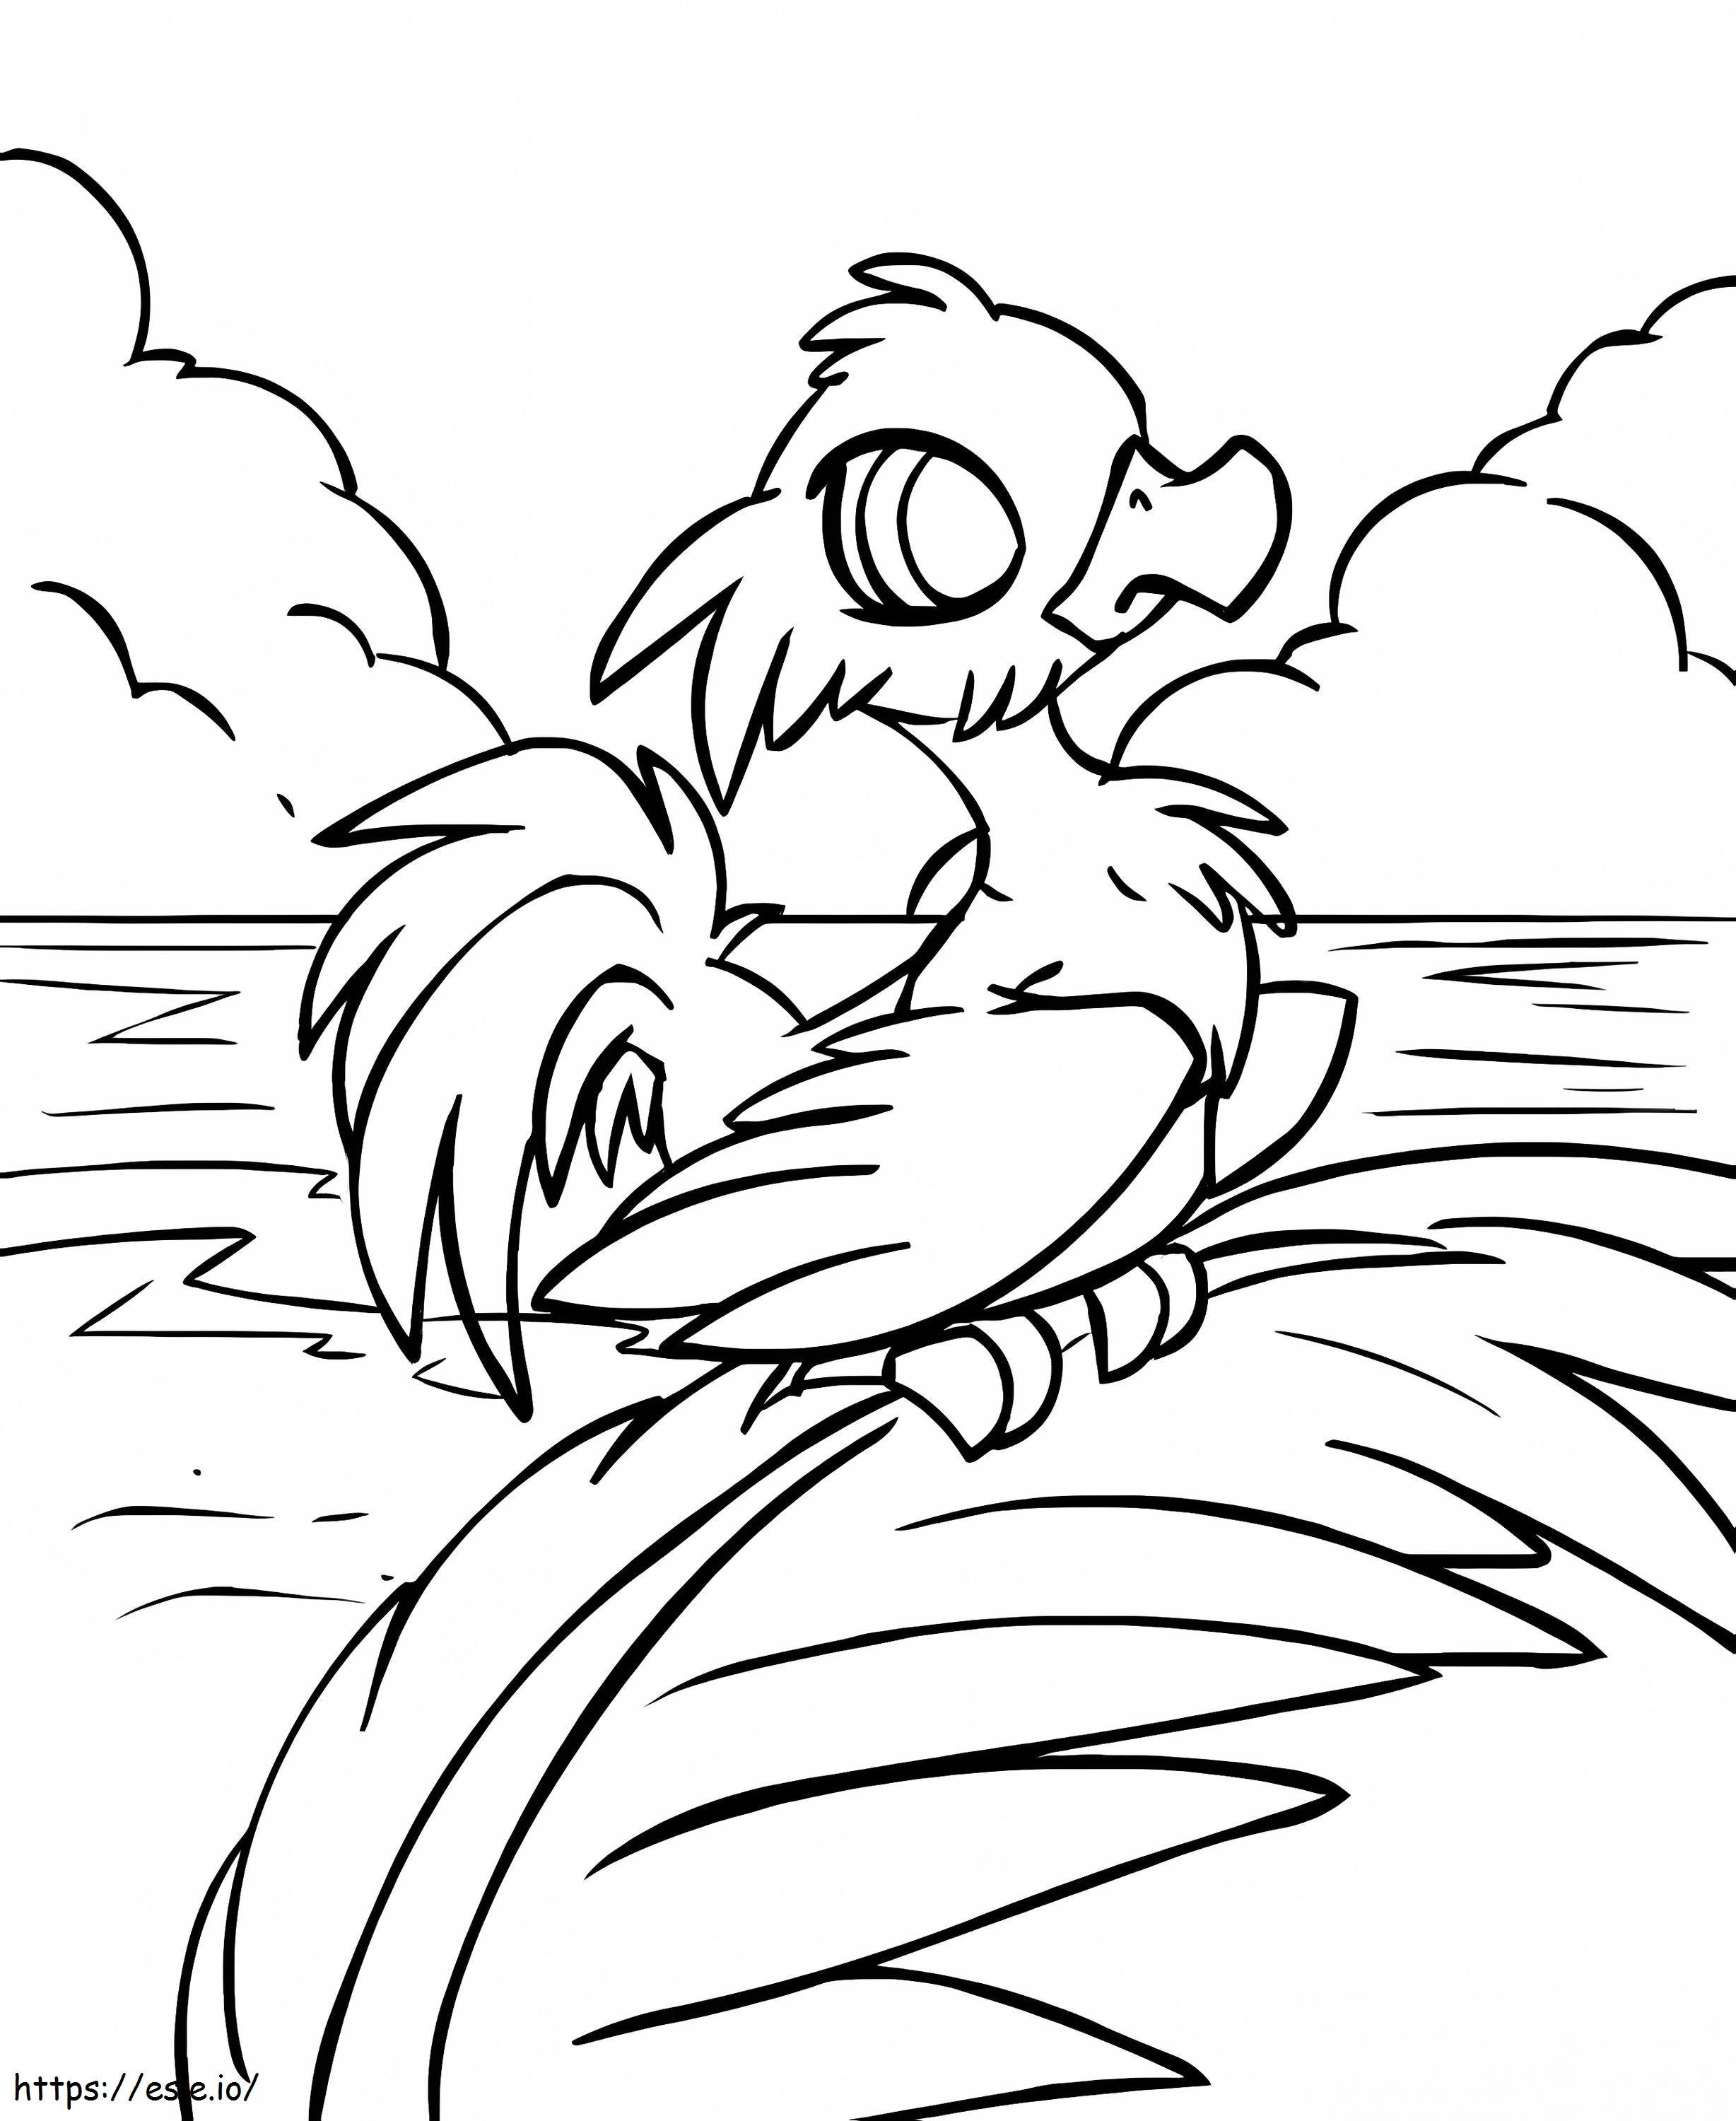 Neopets 10 coloring page